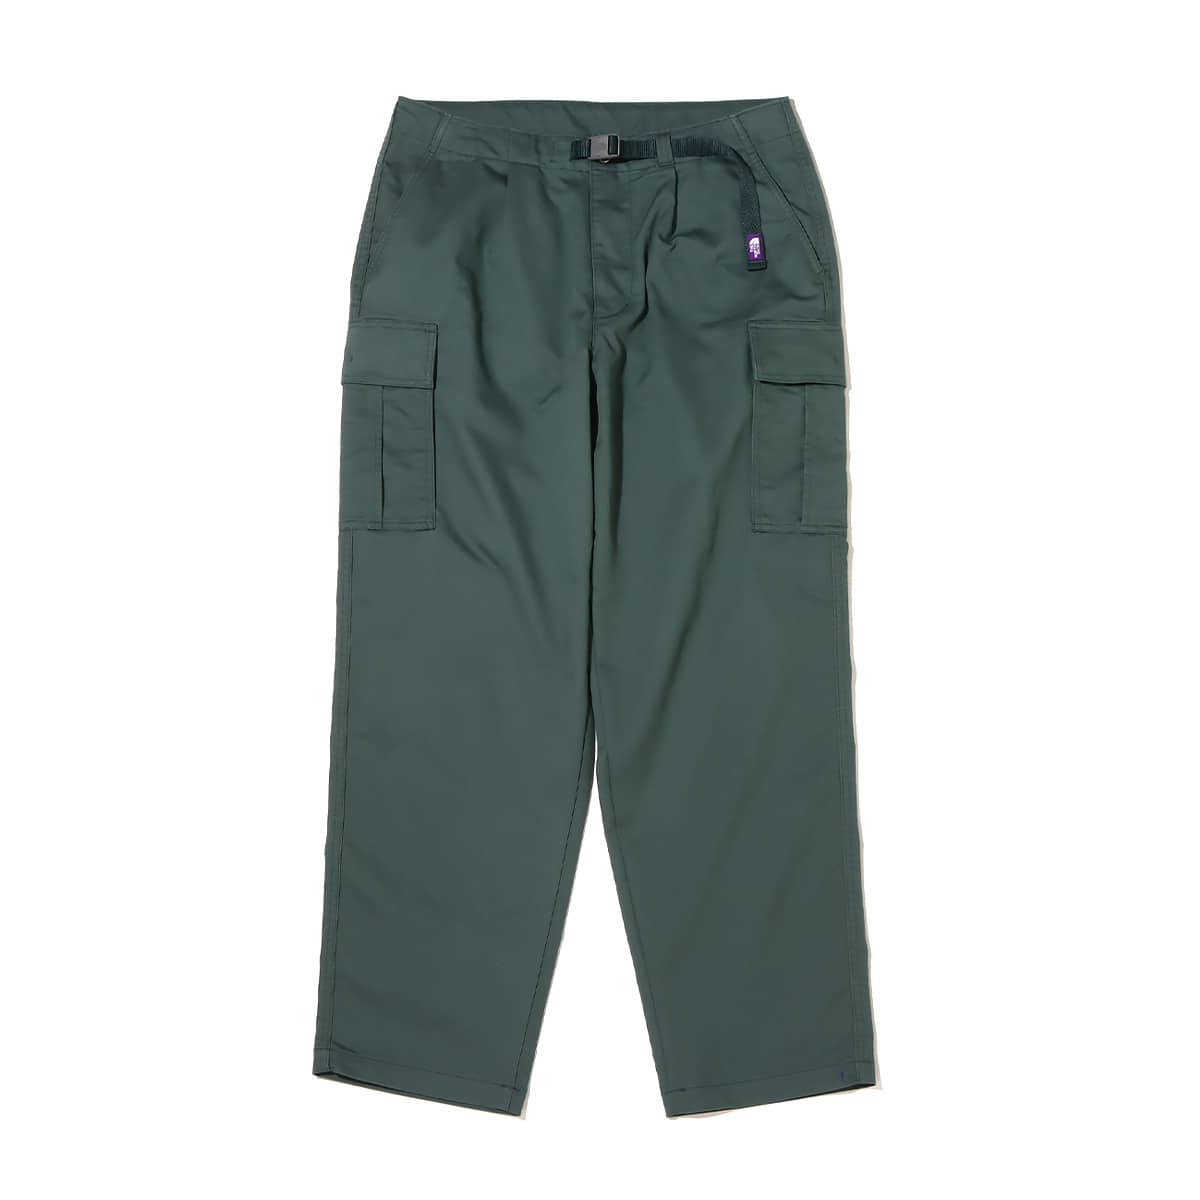 THE NORTH FACE PURPLE LABEL Stretch Twill Cargo Pants Vintage 